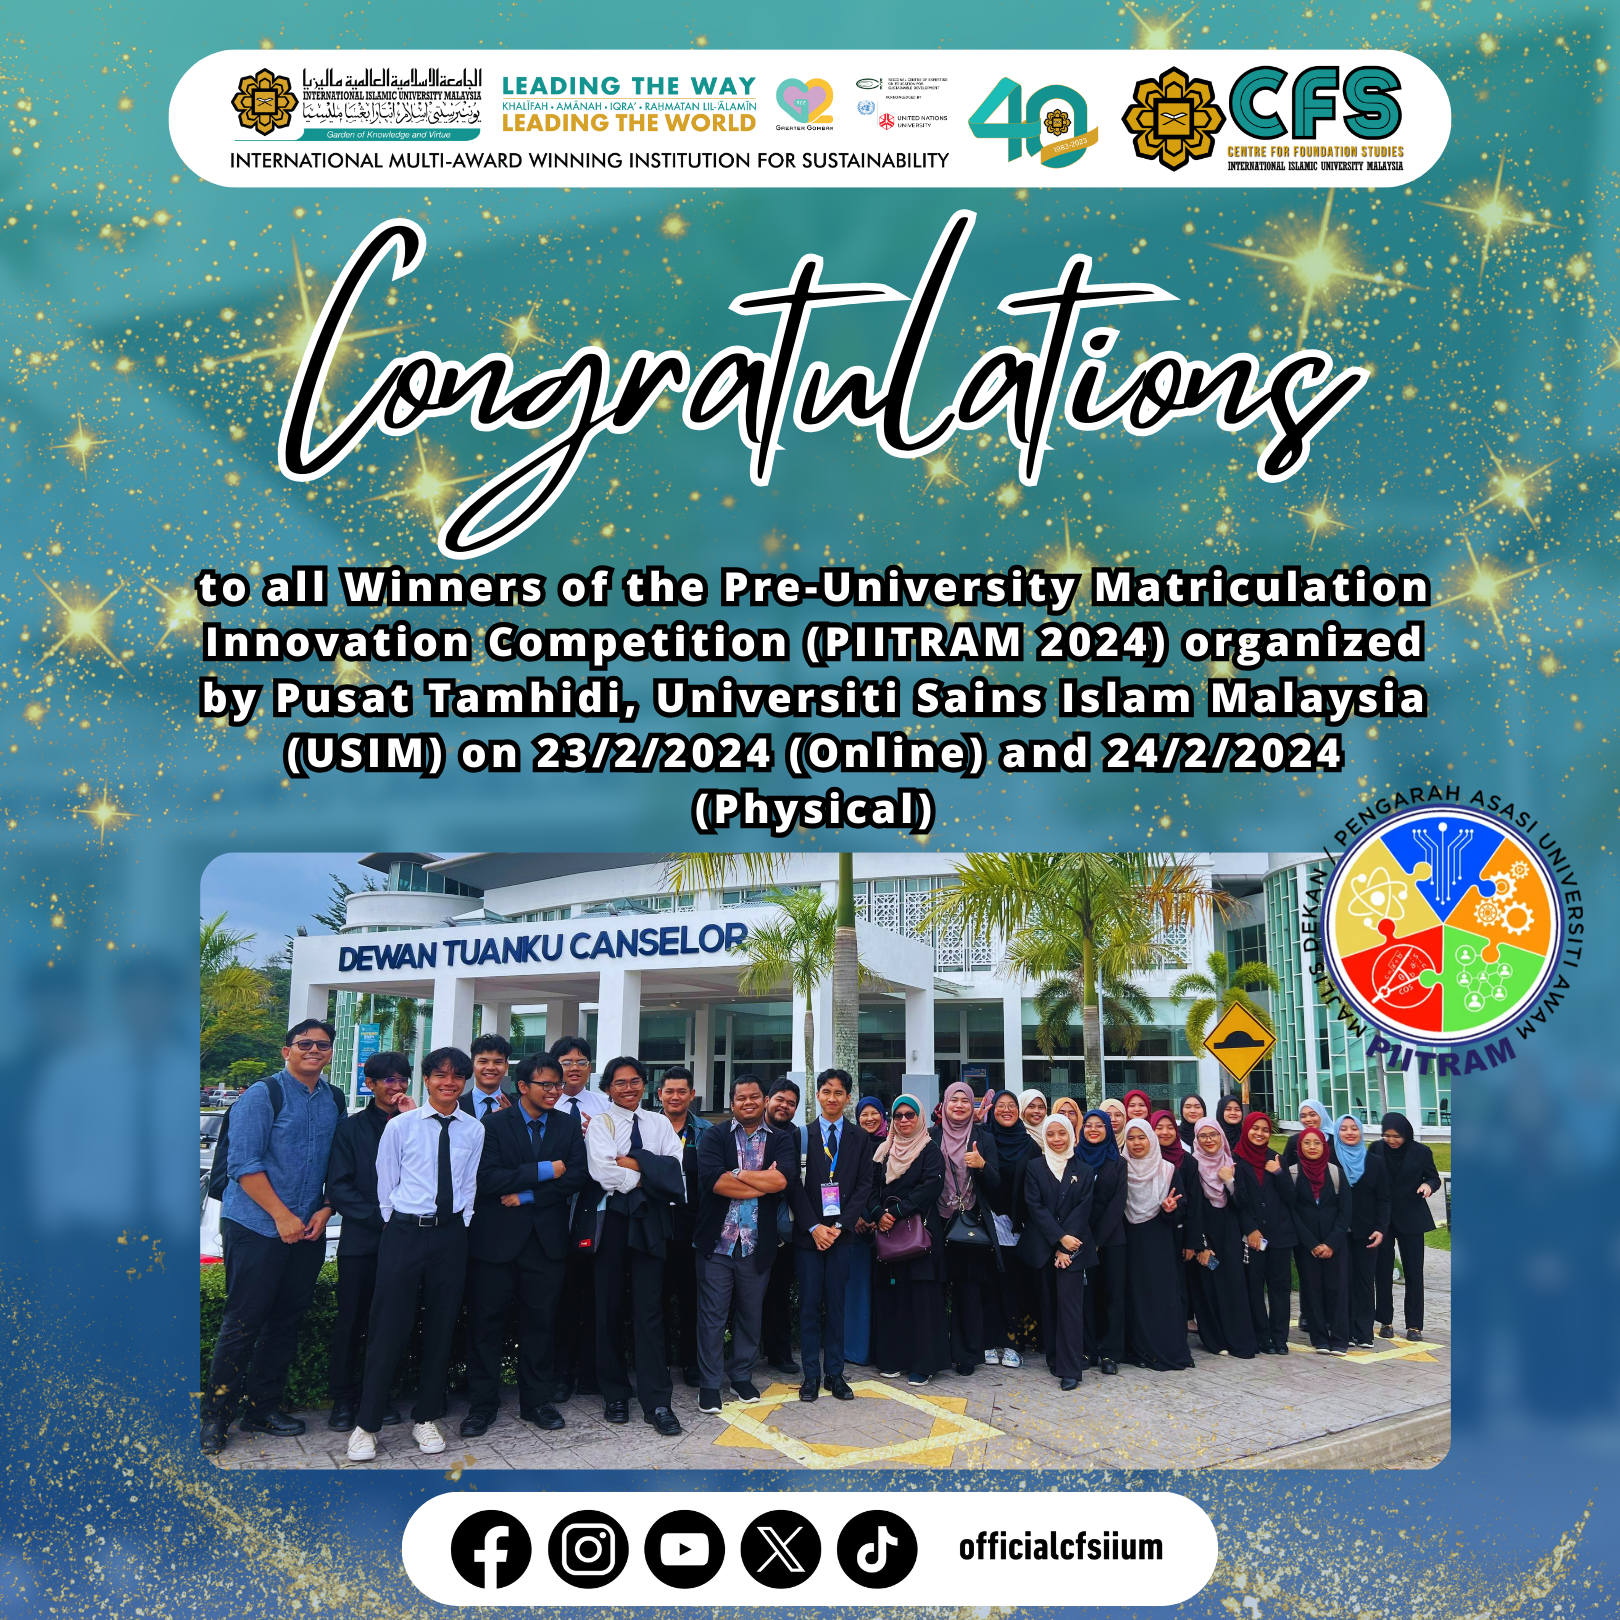 CONGRATULATIONS TO CFS IIUM FOR WINNING THE PRE-UNIVERSITY MATRICULATION INNOVATION COMPETITION – PIITRAM 2024